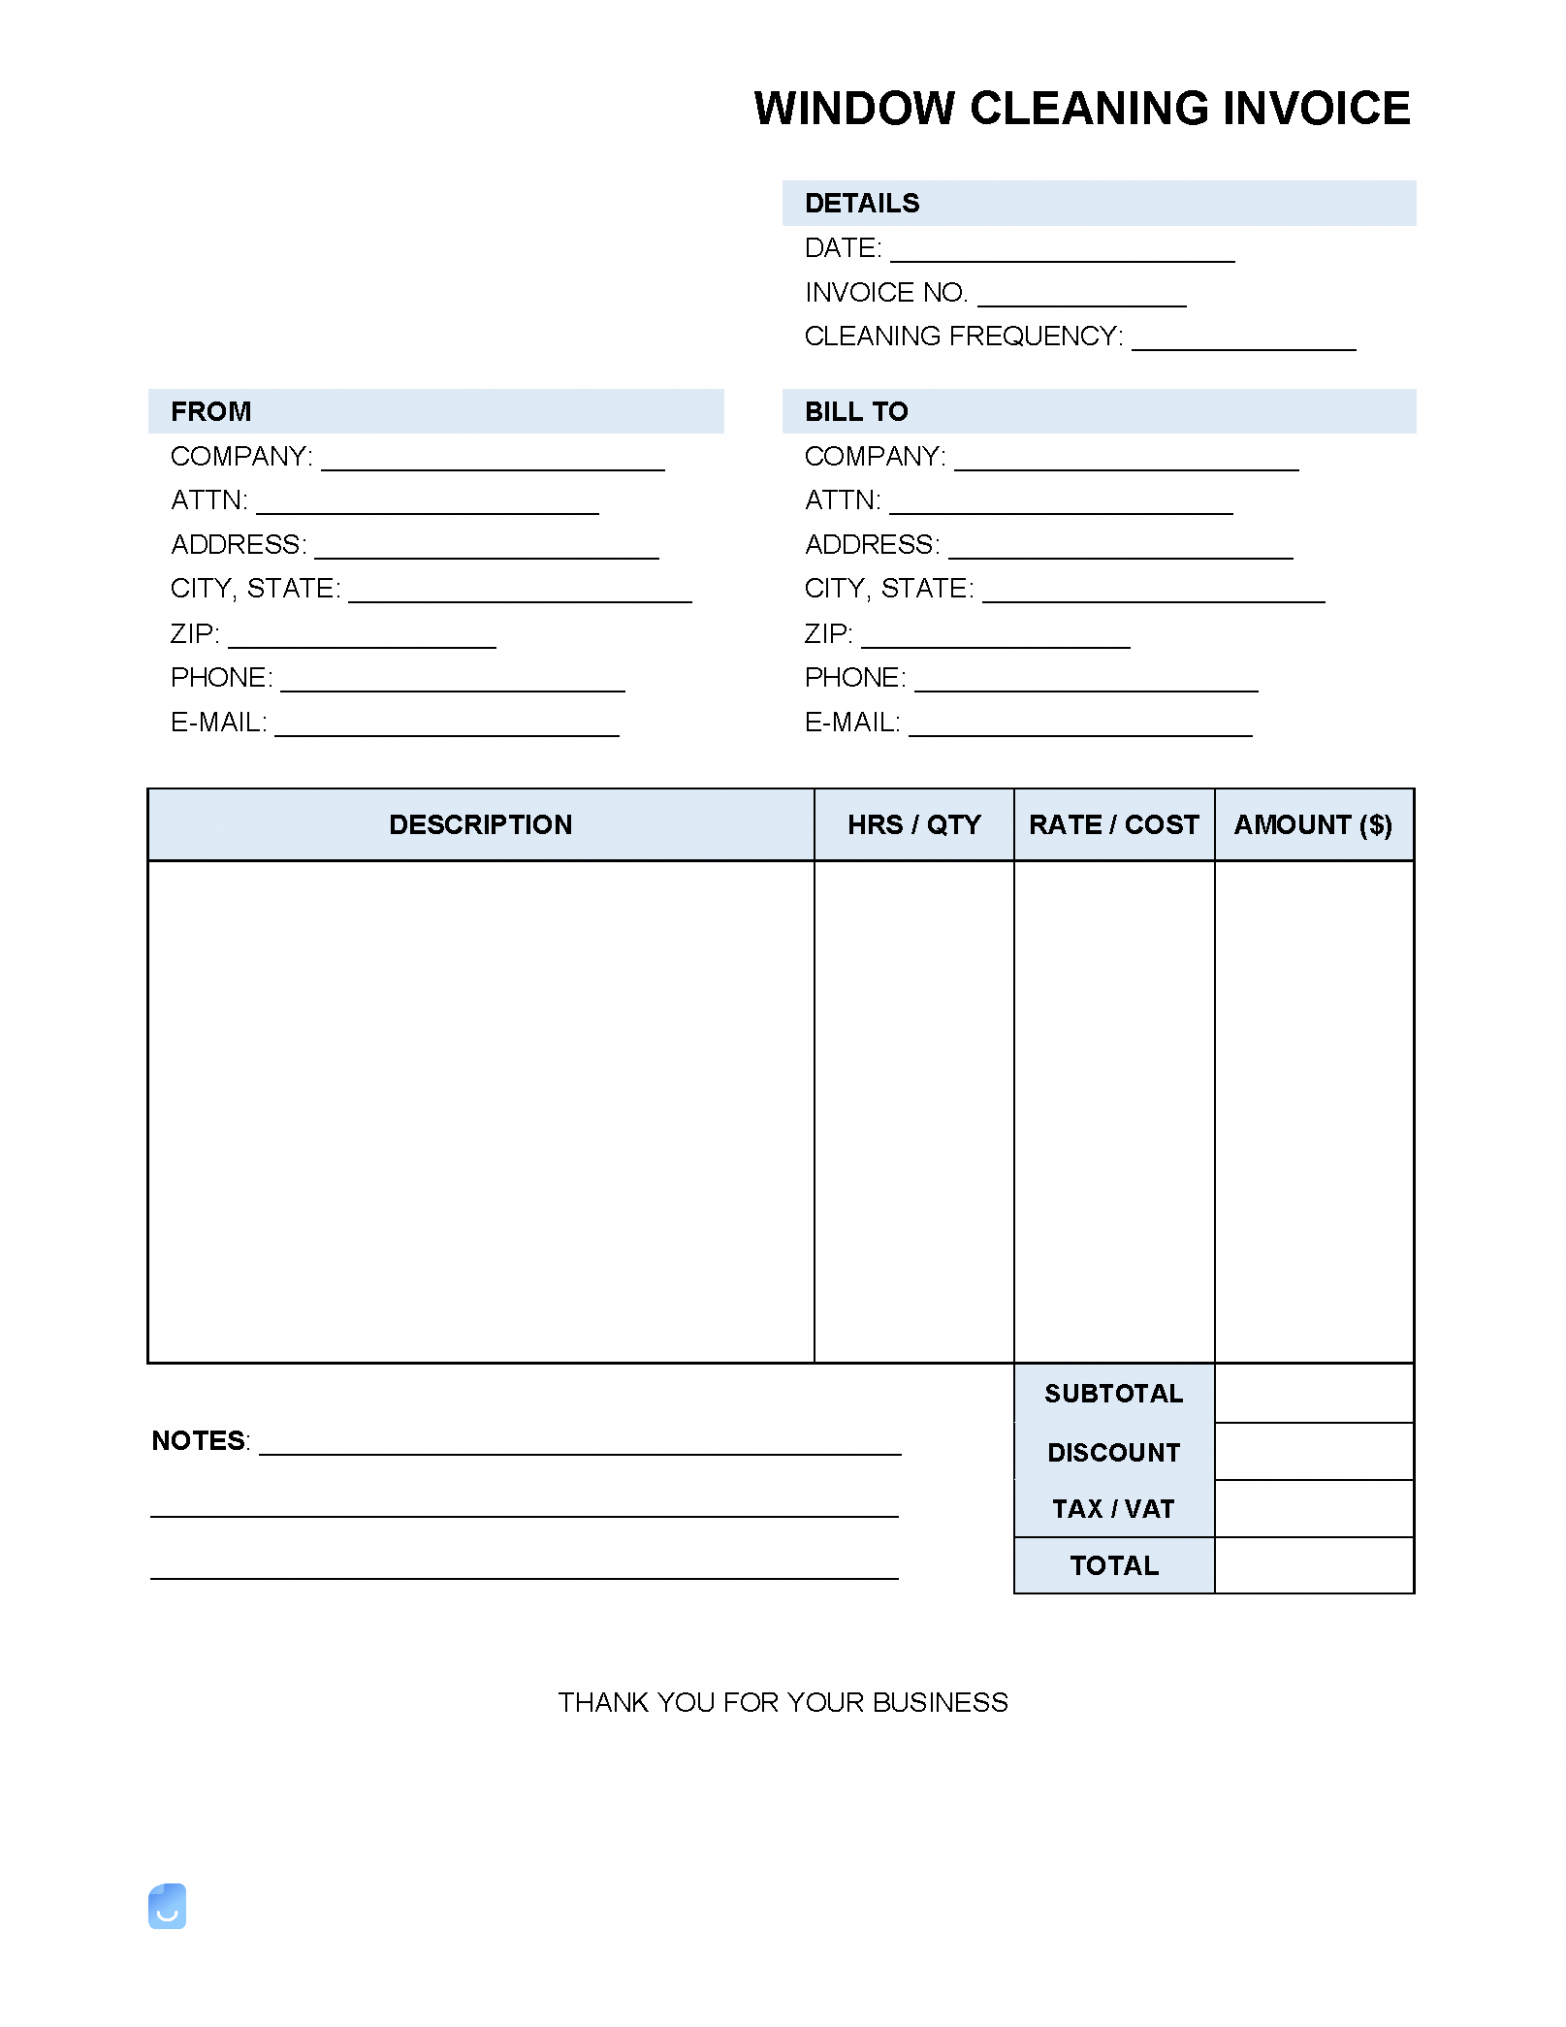 Sample Window Cleaning Invoice Template PDF